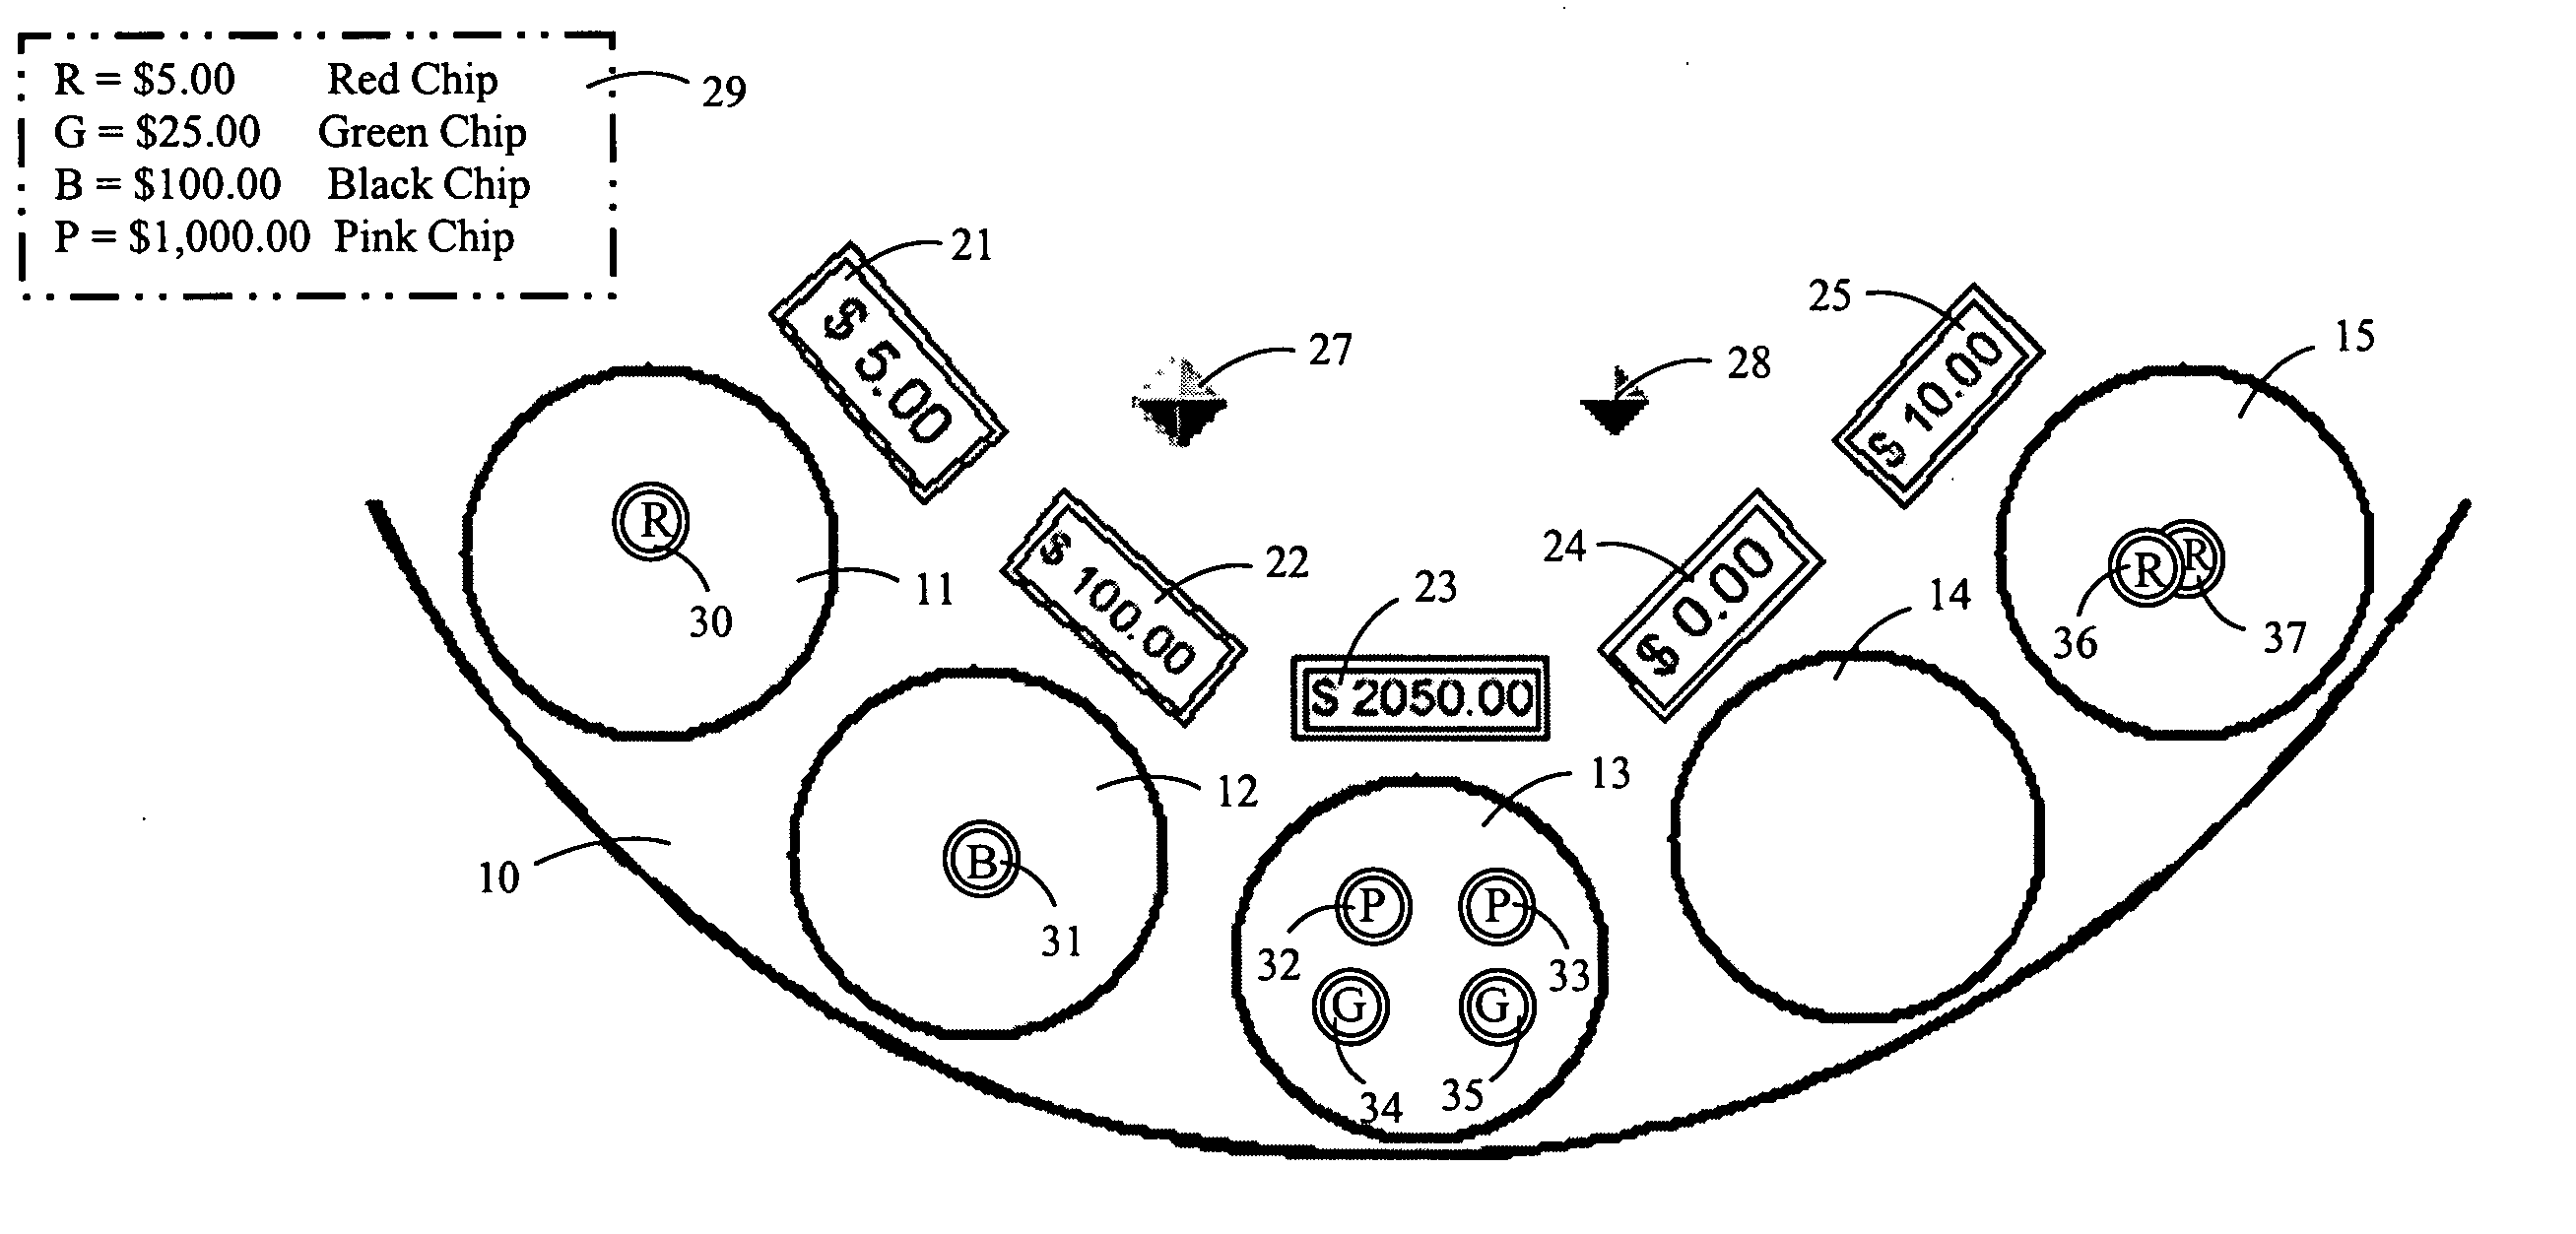 Method and apparatus for verifying players' bets on a gaming table